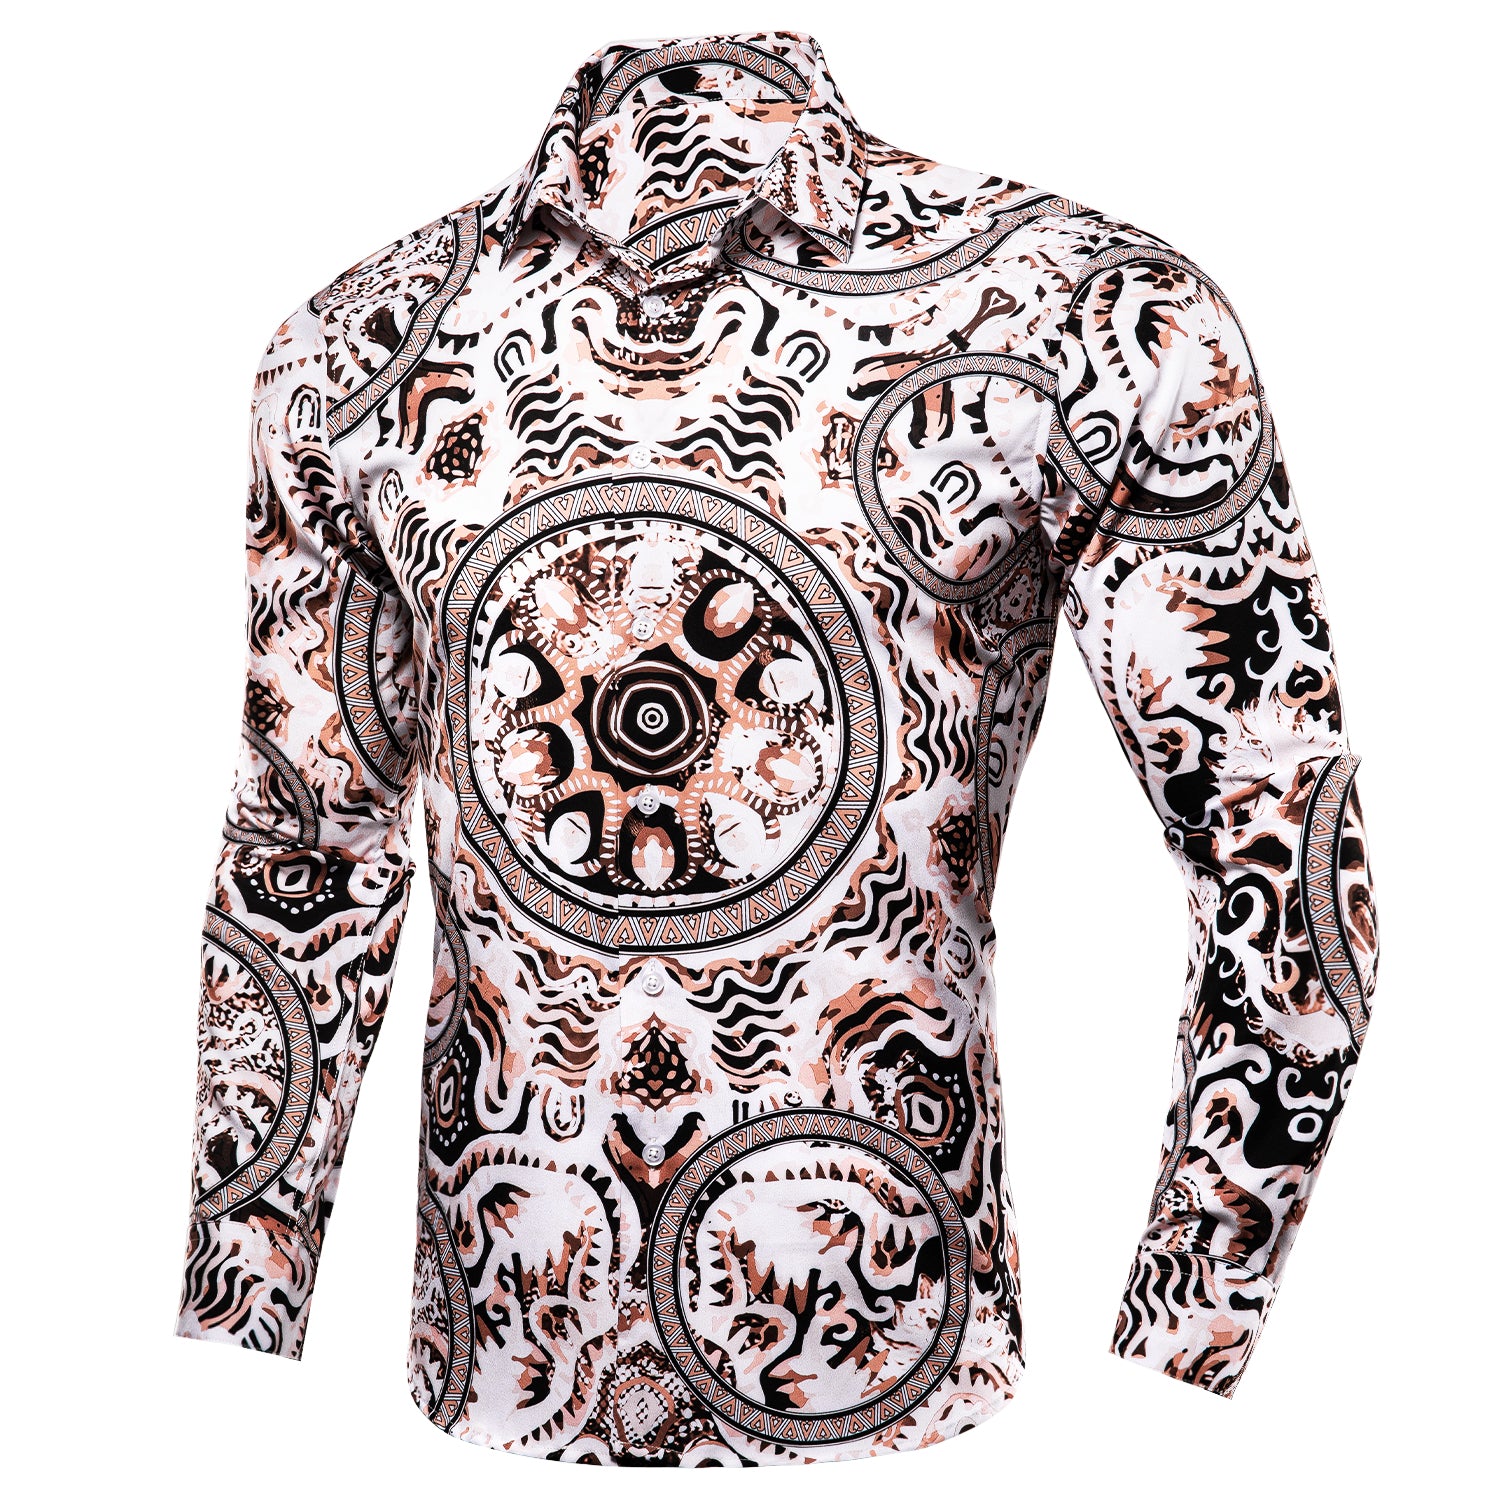 New White Brown Curcle Print Novelty Men's Shirt